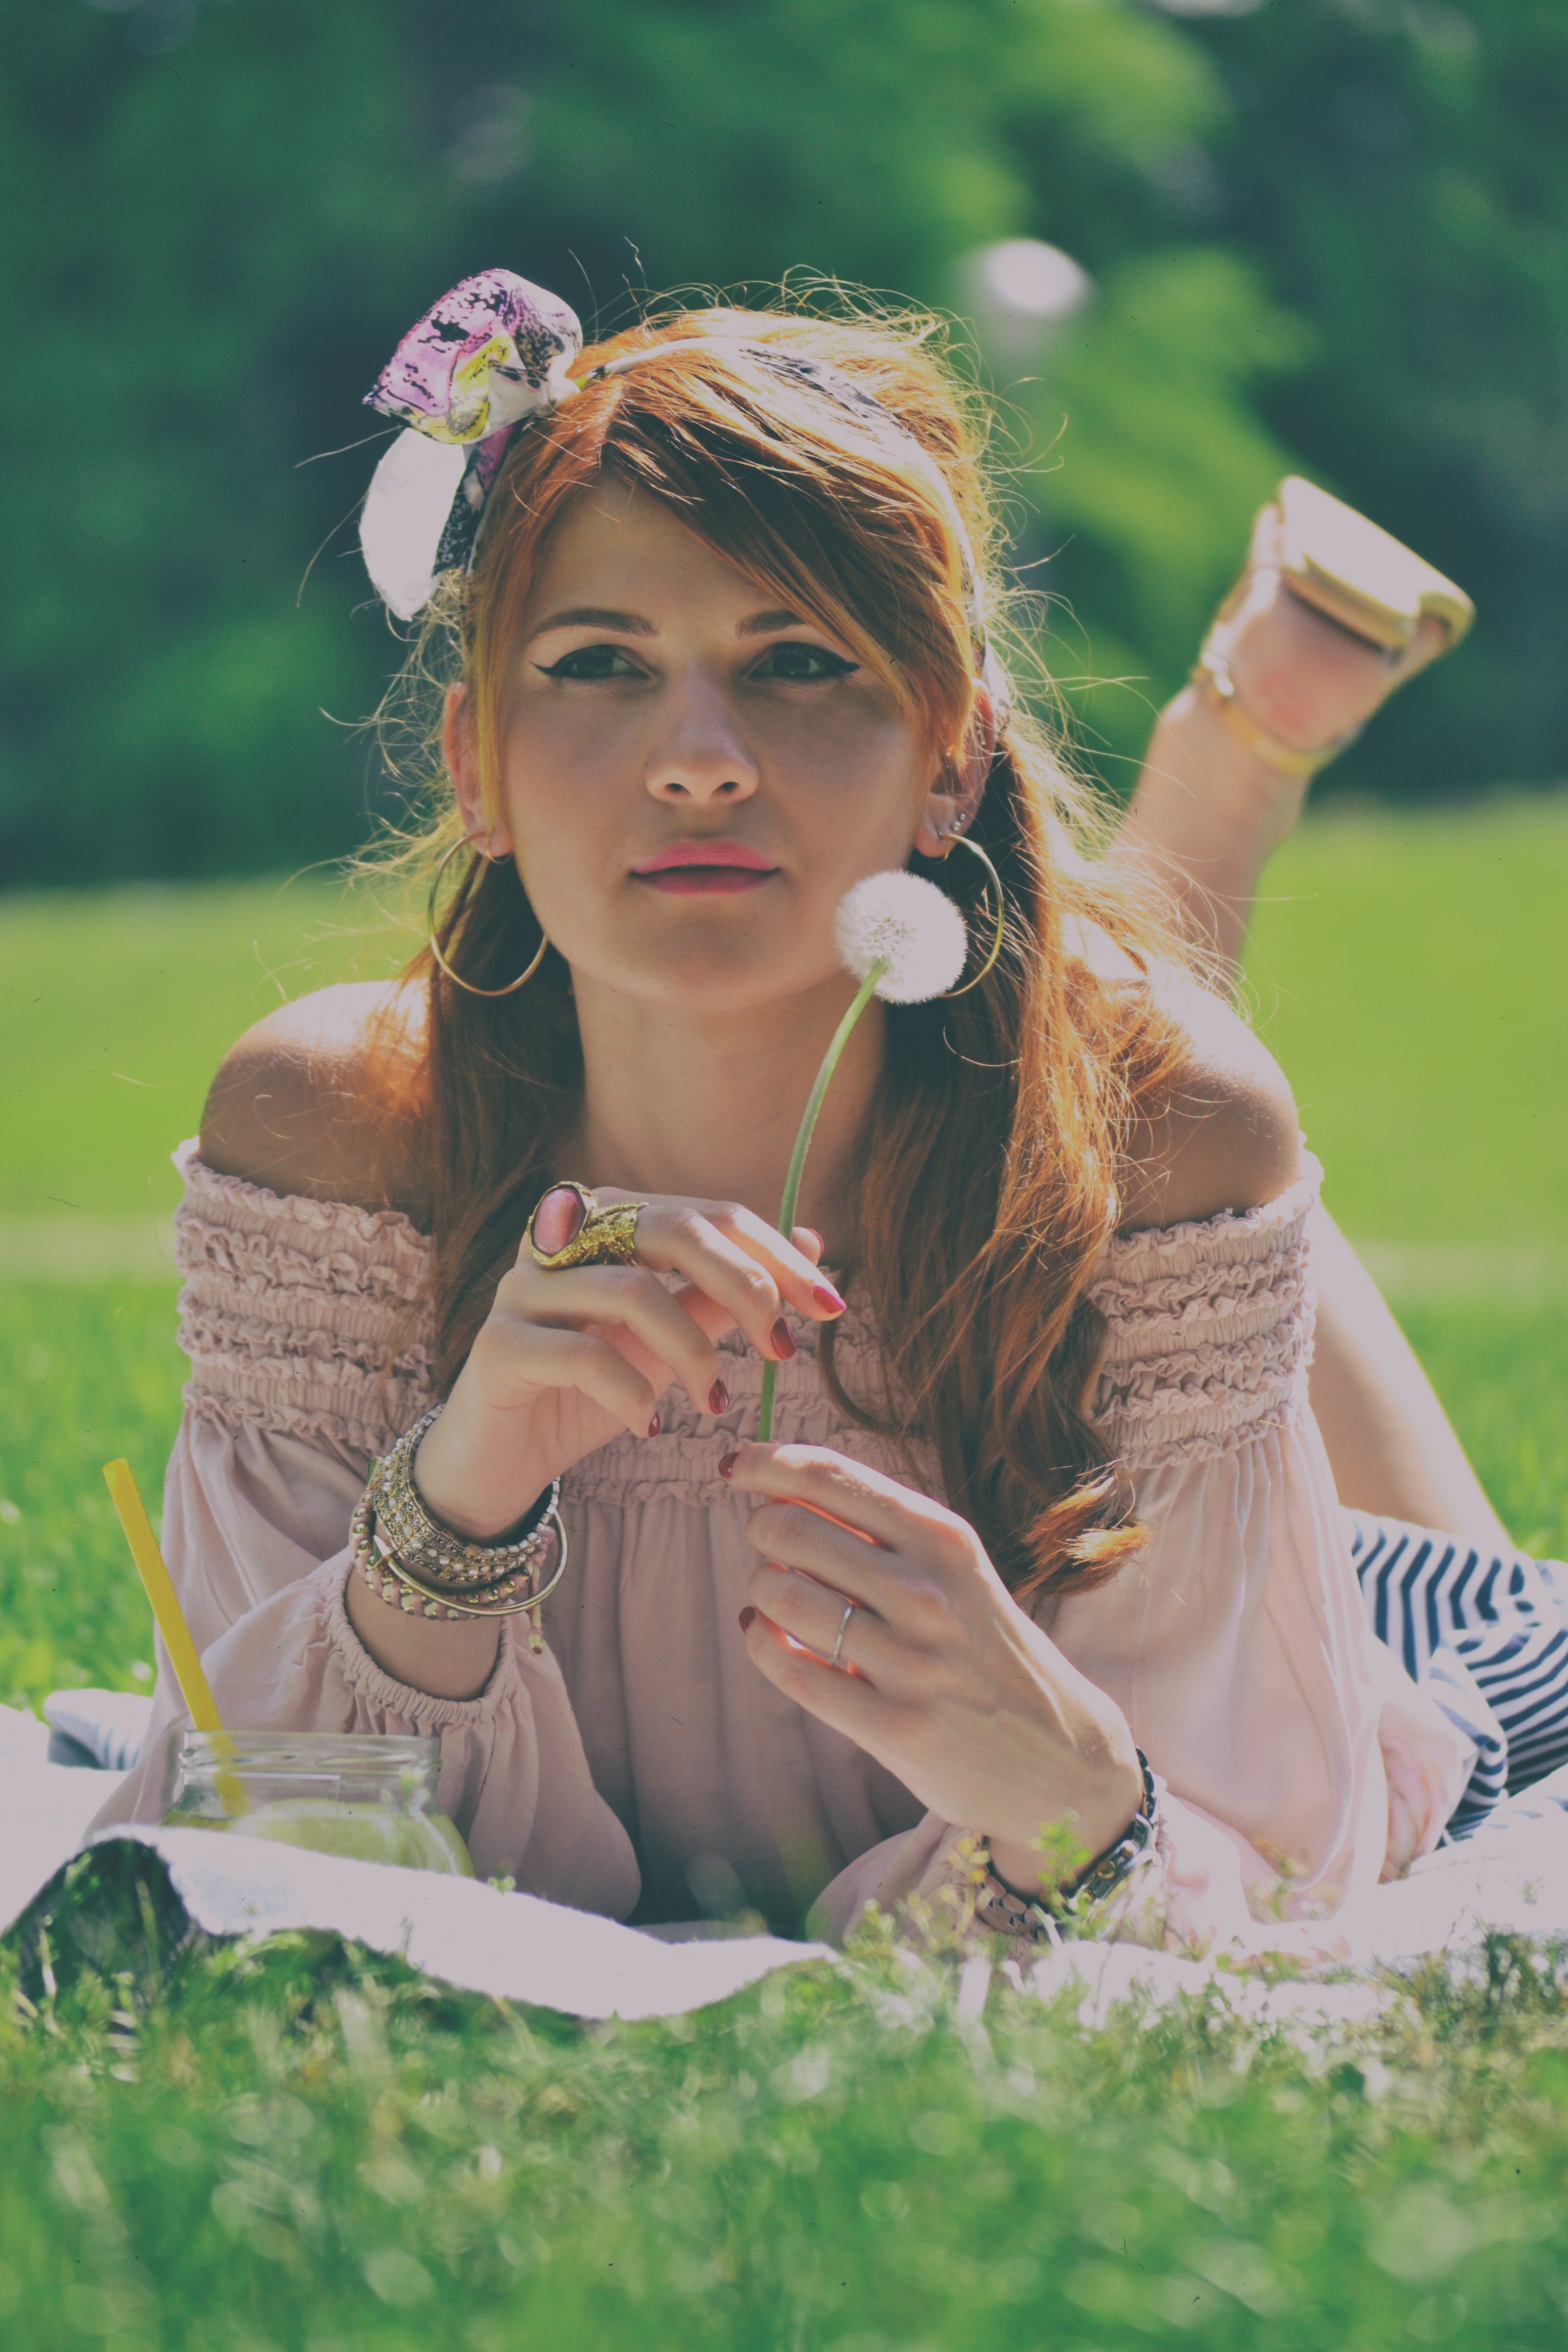 Portrait of Woman Lying on Grass at Daylight Photography, Accessories, Picnic, Lips, Look, HQ Photo